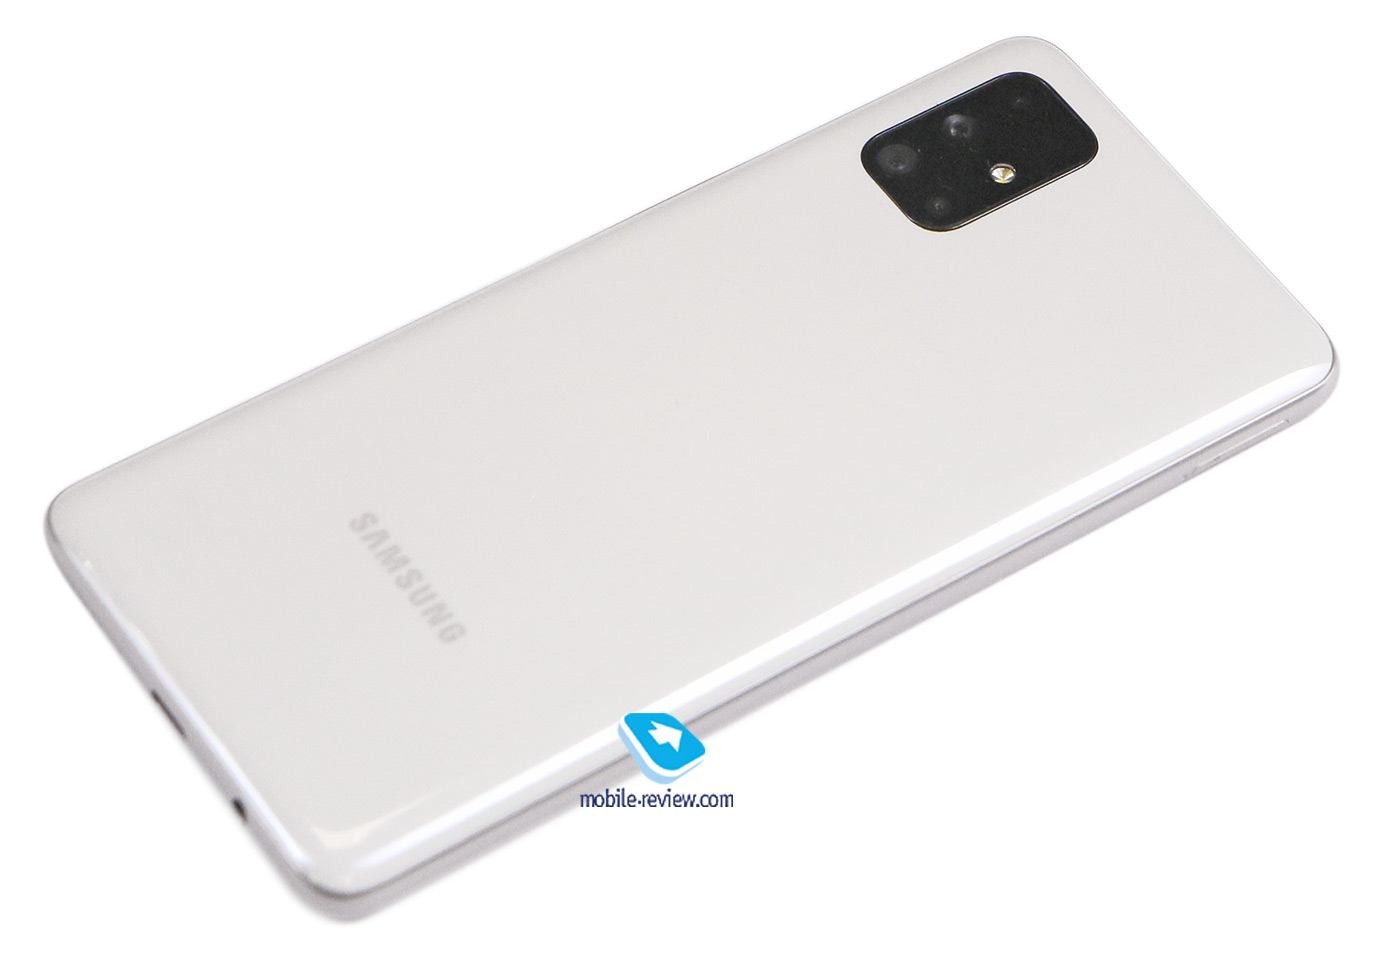 Samsung Galaxy M51 (SM-M515F / DS) smartphone review